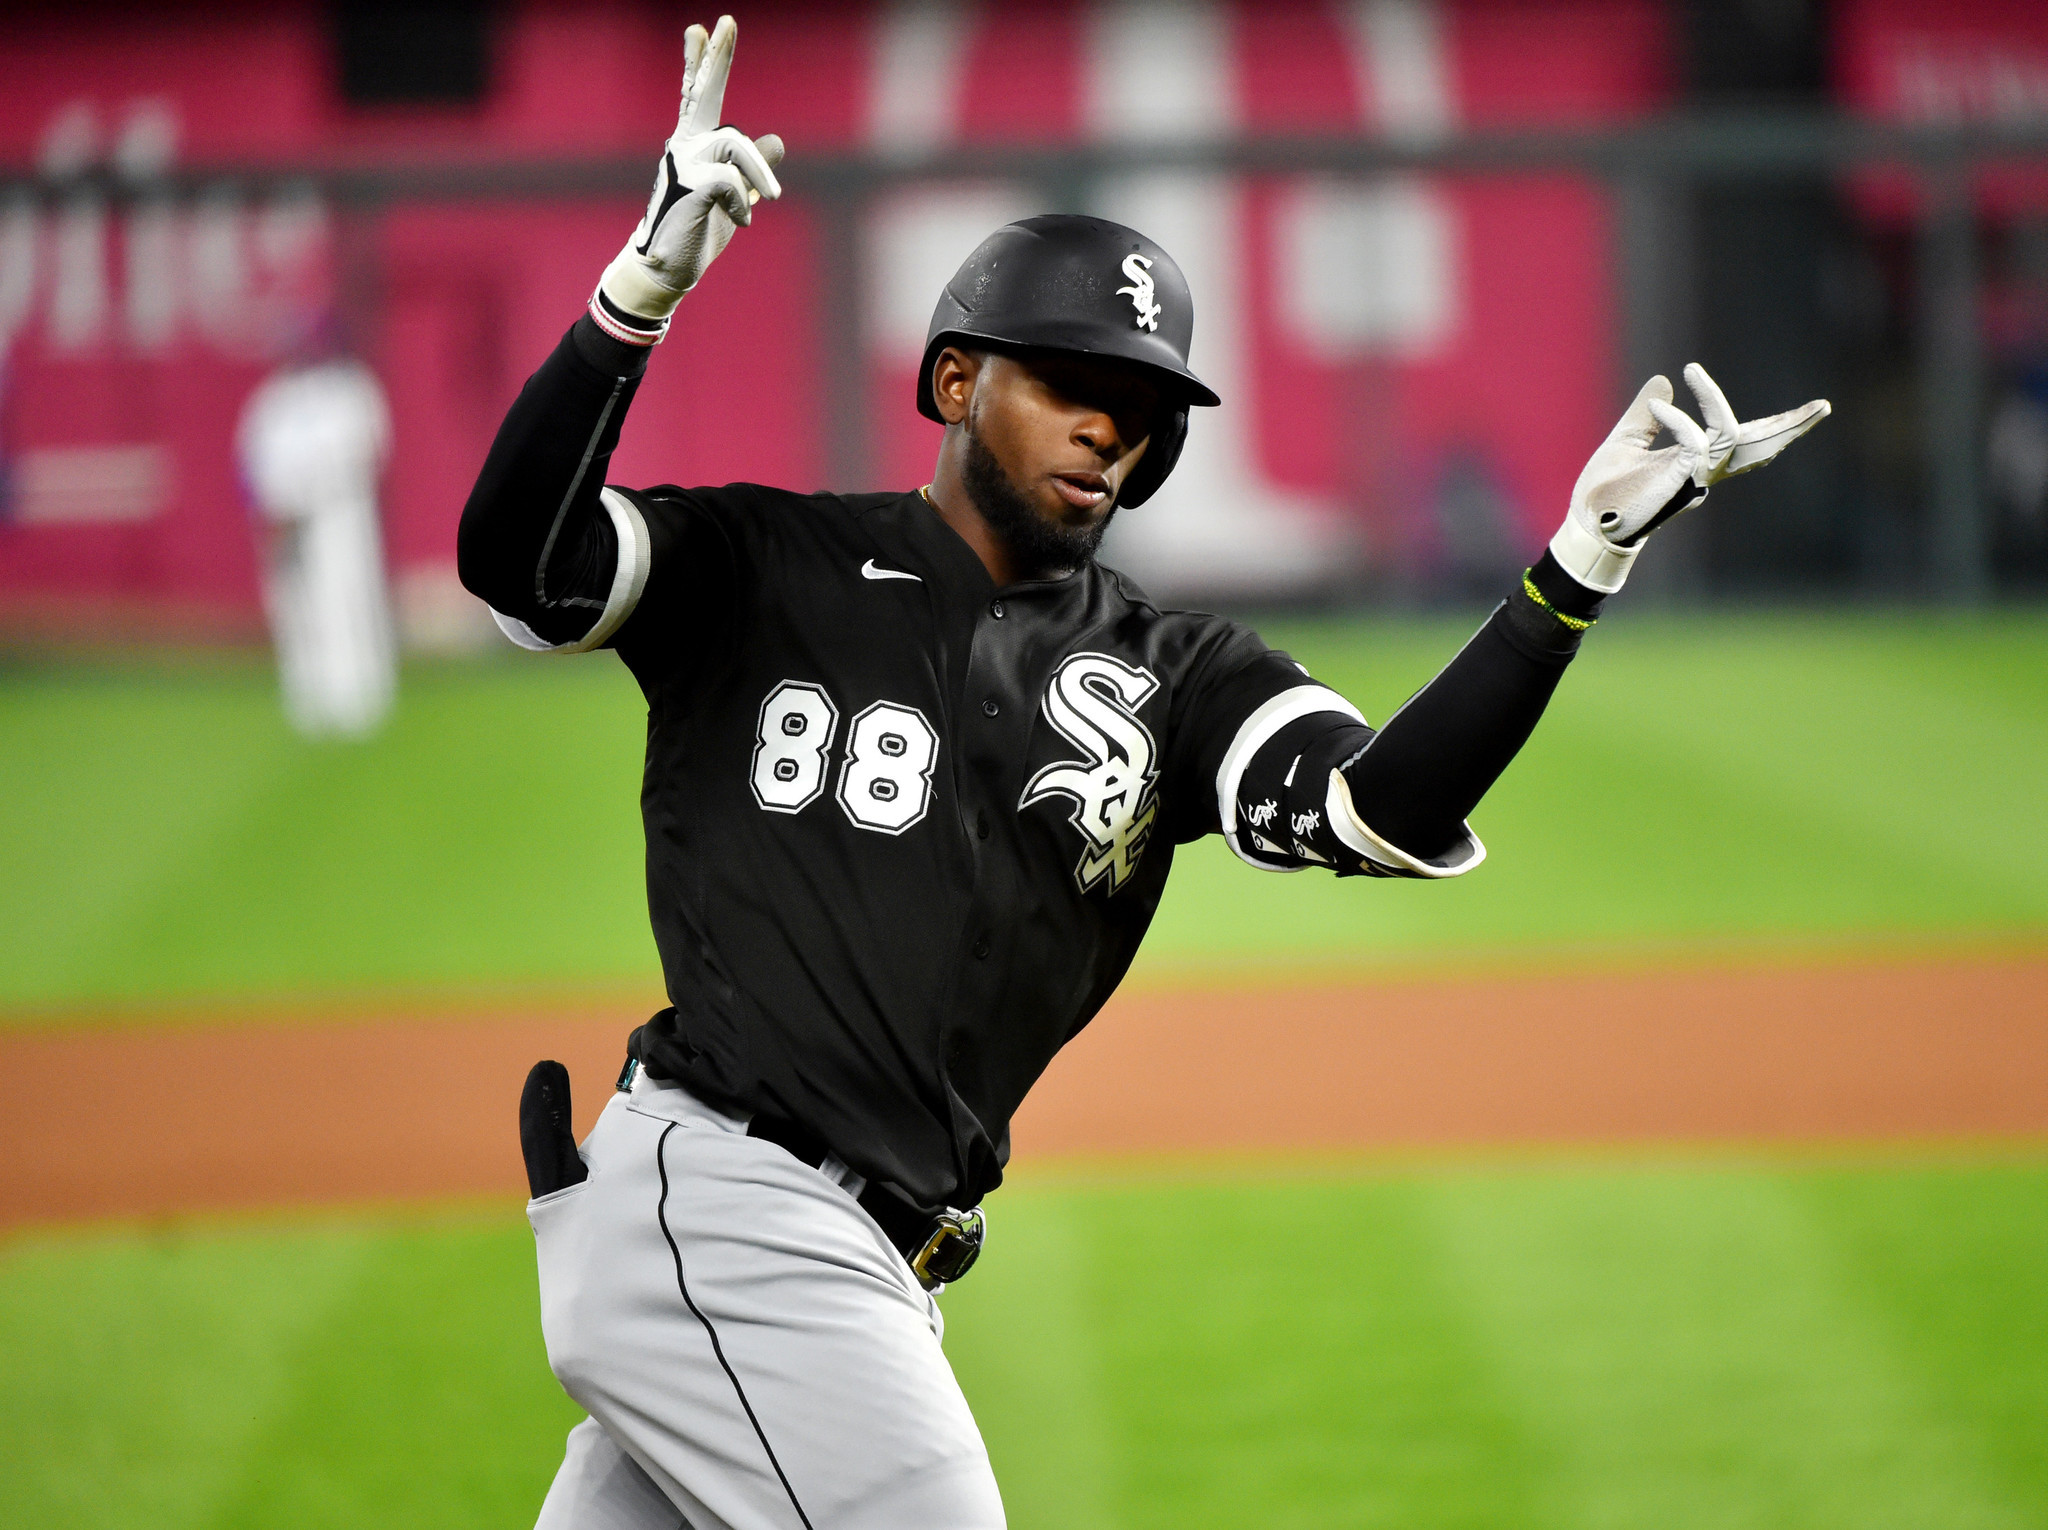 Chicago White Sox hit 3 homers in 11-6 win over Royals